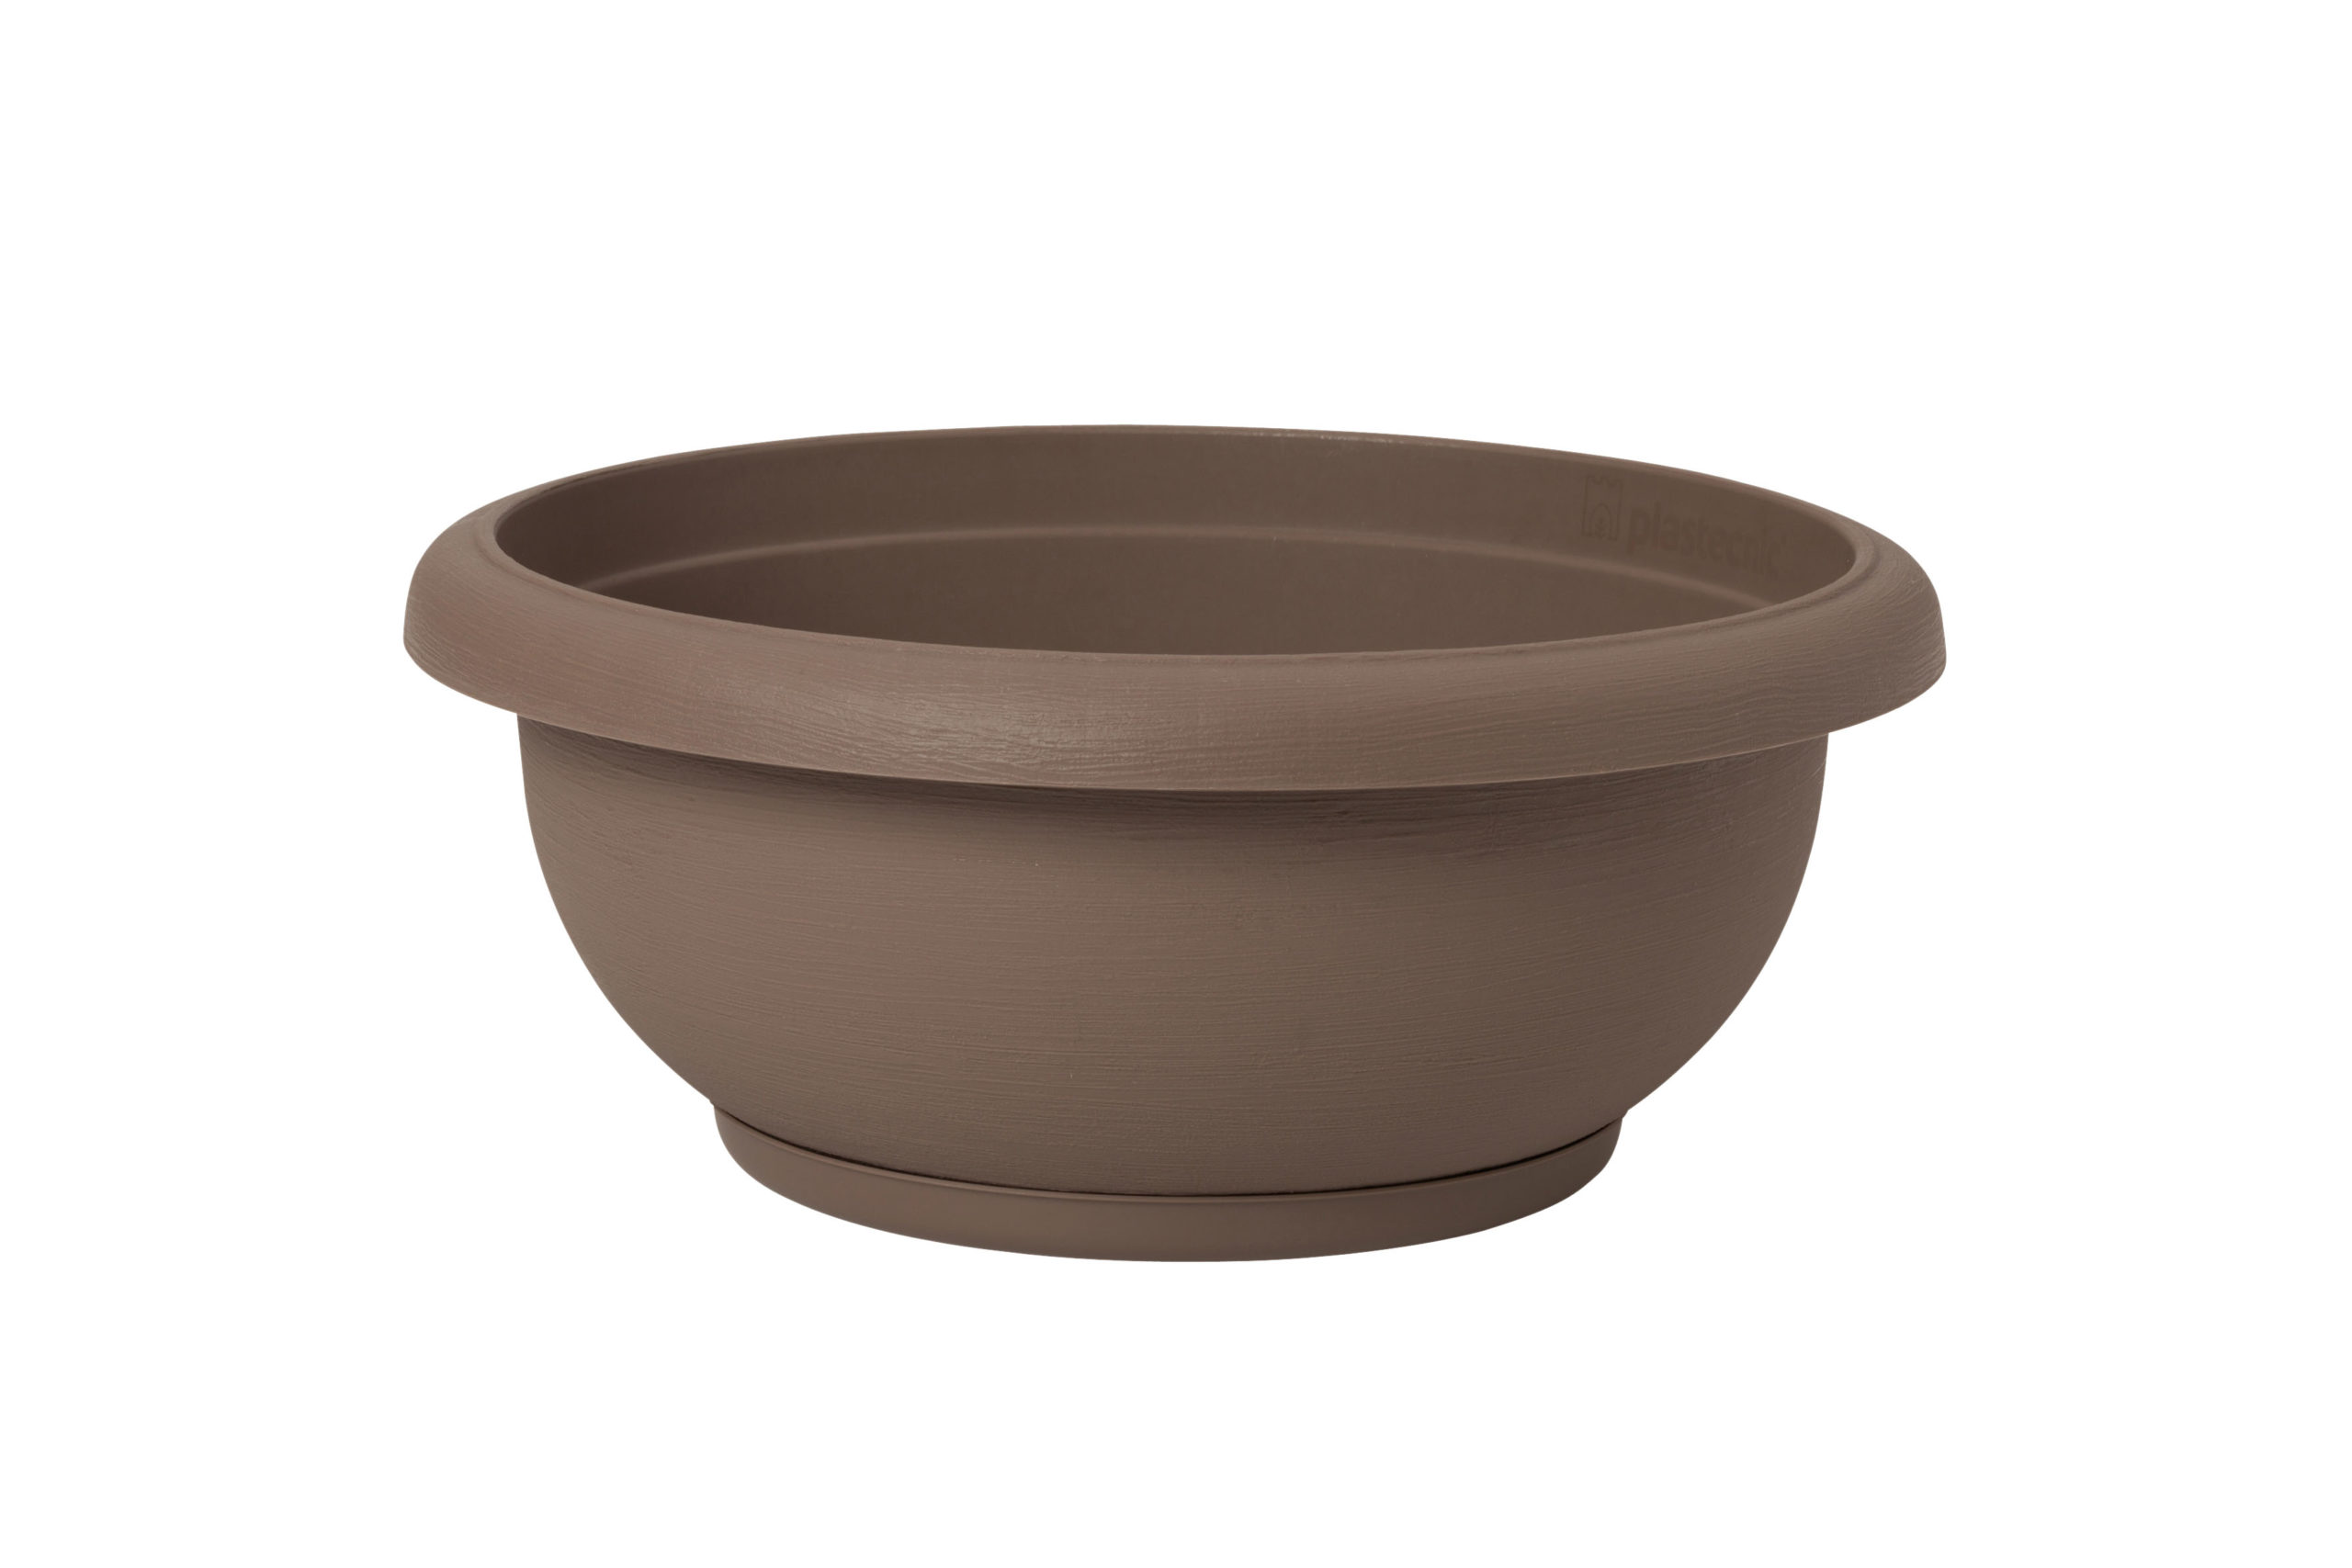 ROUND POT SAUCER - Treadstone Products